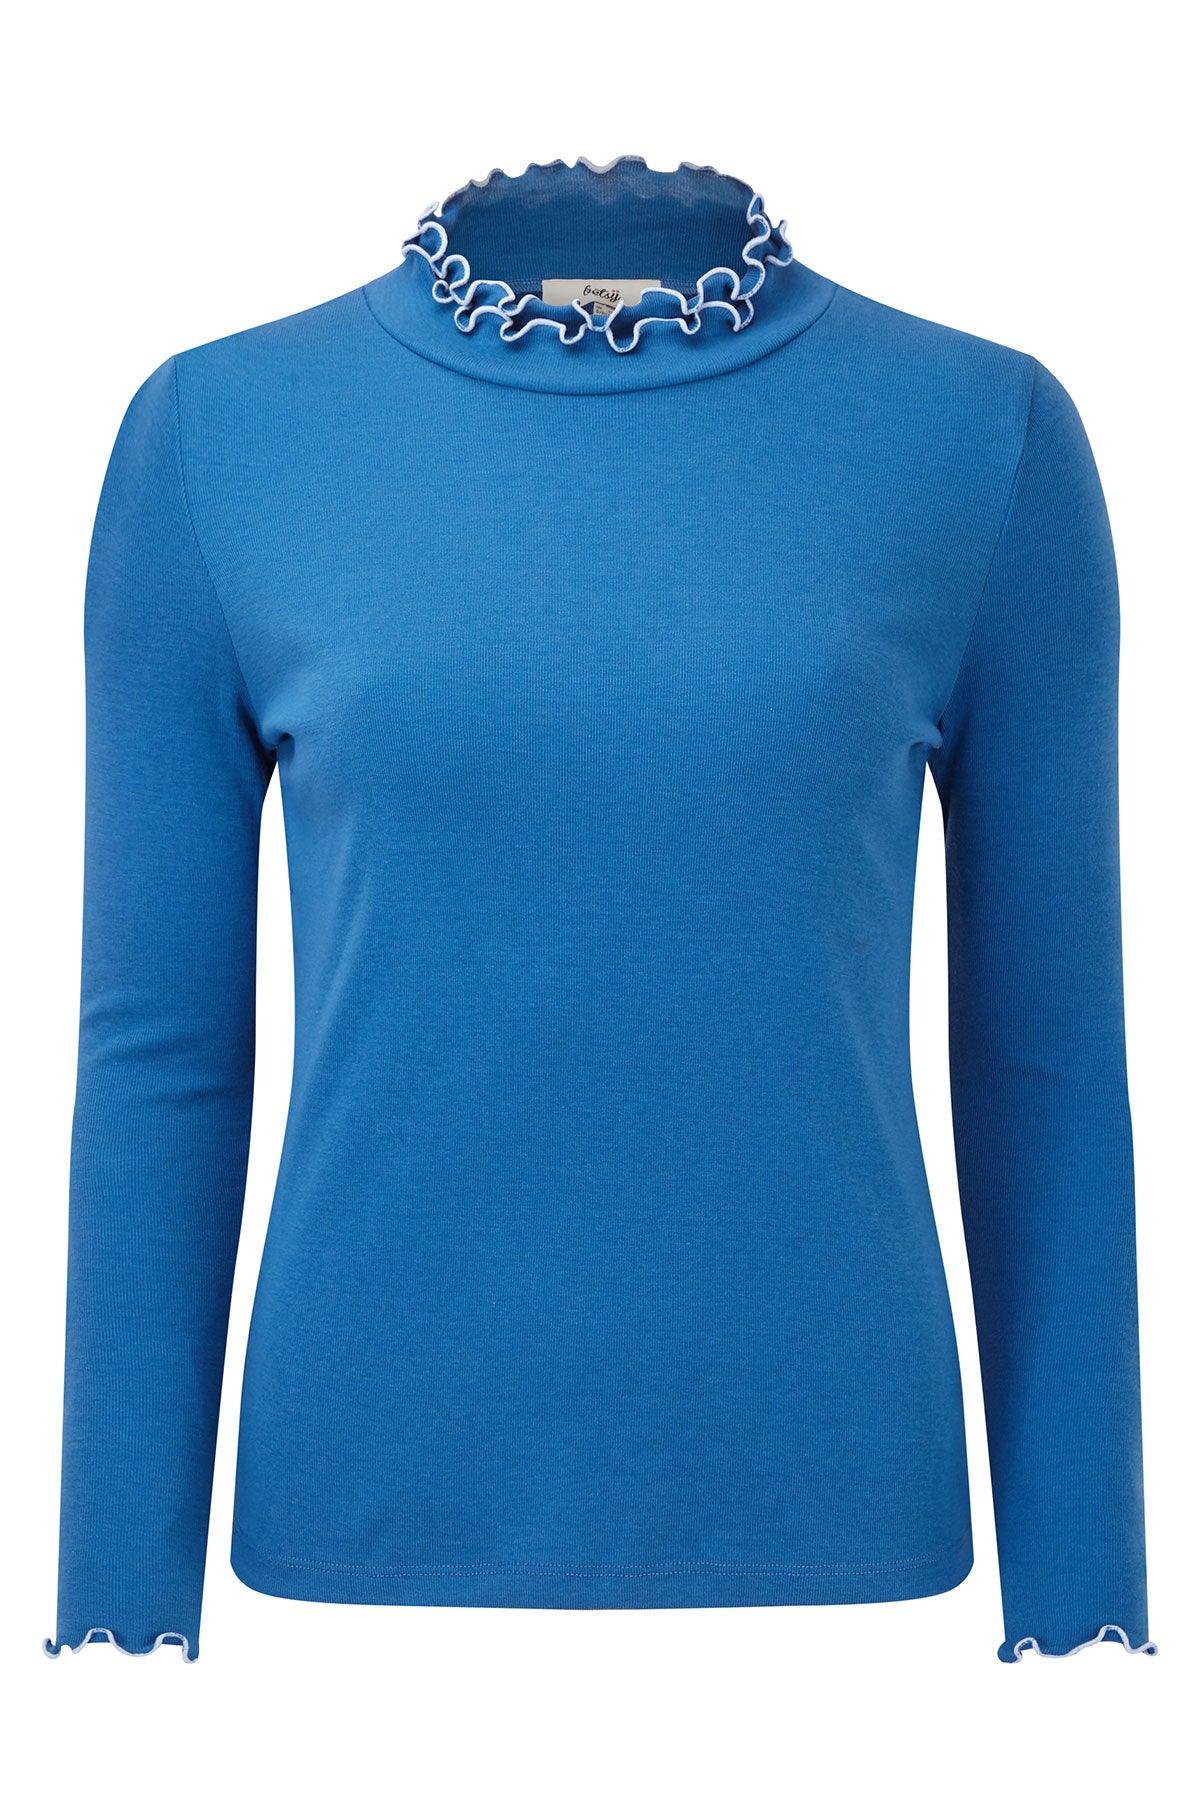 Betsy Ruffle Turtle Neck Top (Sapphire)